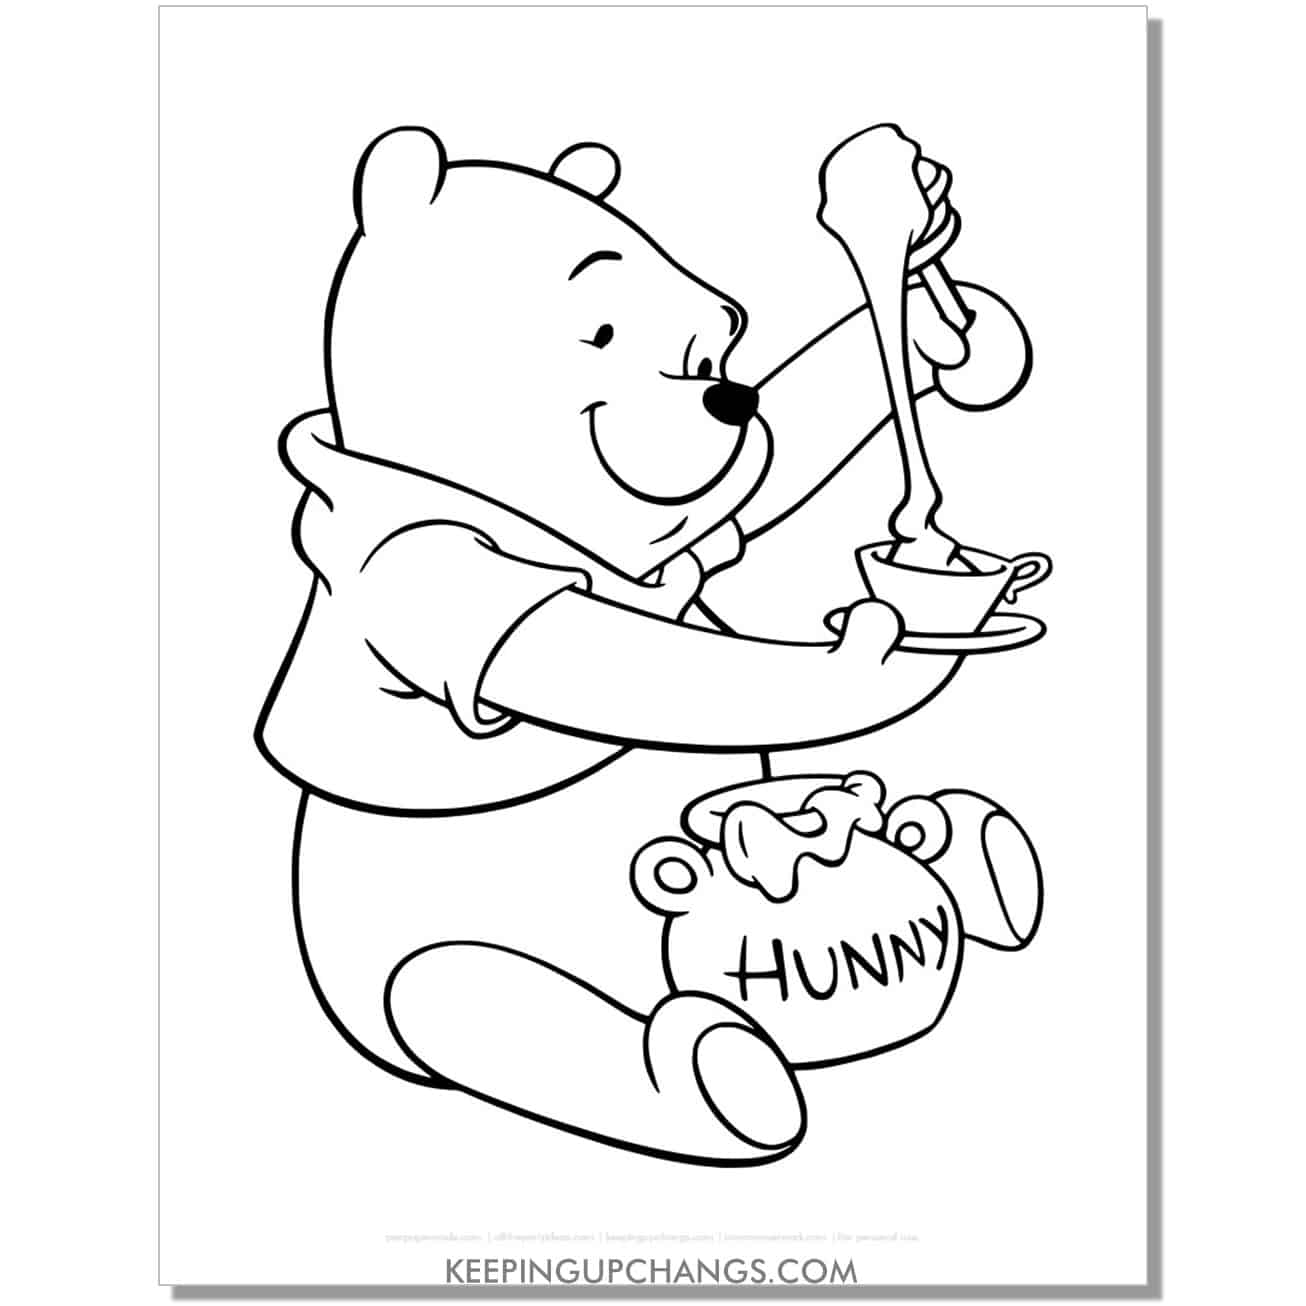 winnie the pooh putting honey into tea coloring page, sheet.